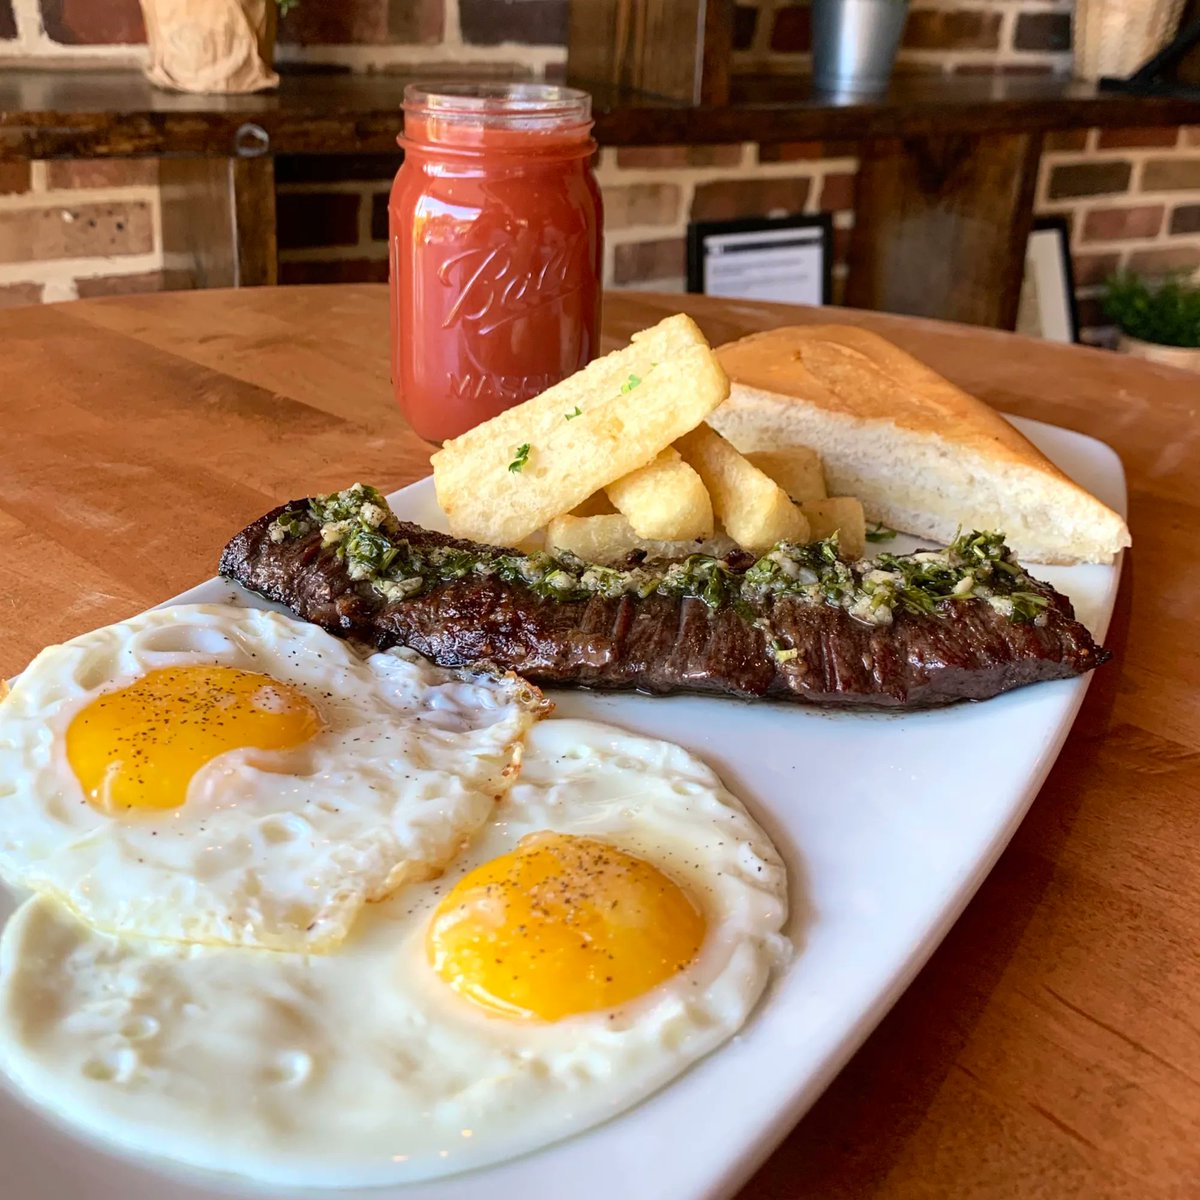 Wake up to Steak & Eggs 🥩🍳⏰ 🥱

Tag someone you want to share breakfast with and start your morning off right. 🌞

Join us for Breakfast from 8-11AM

#BreakfastOfChampions #SteakAndEggs #LOVESOFRITO